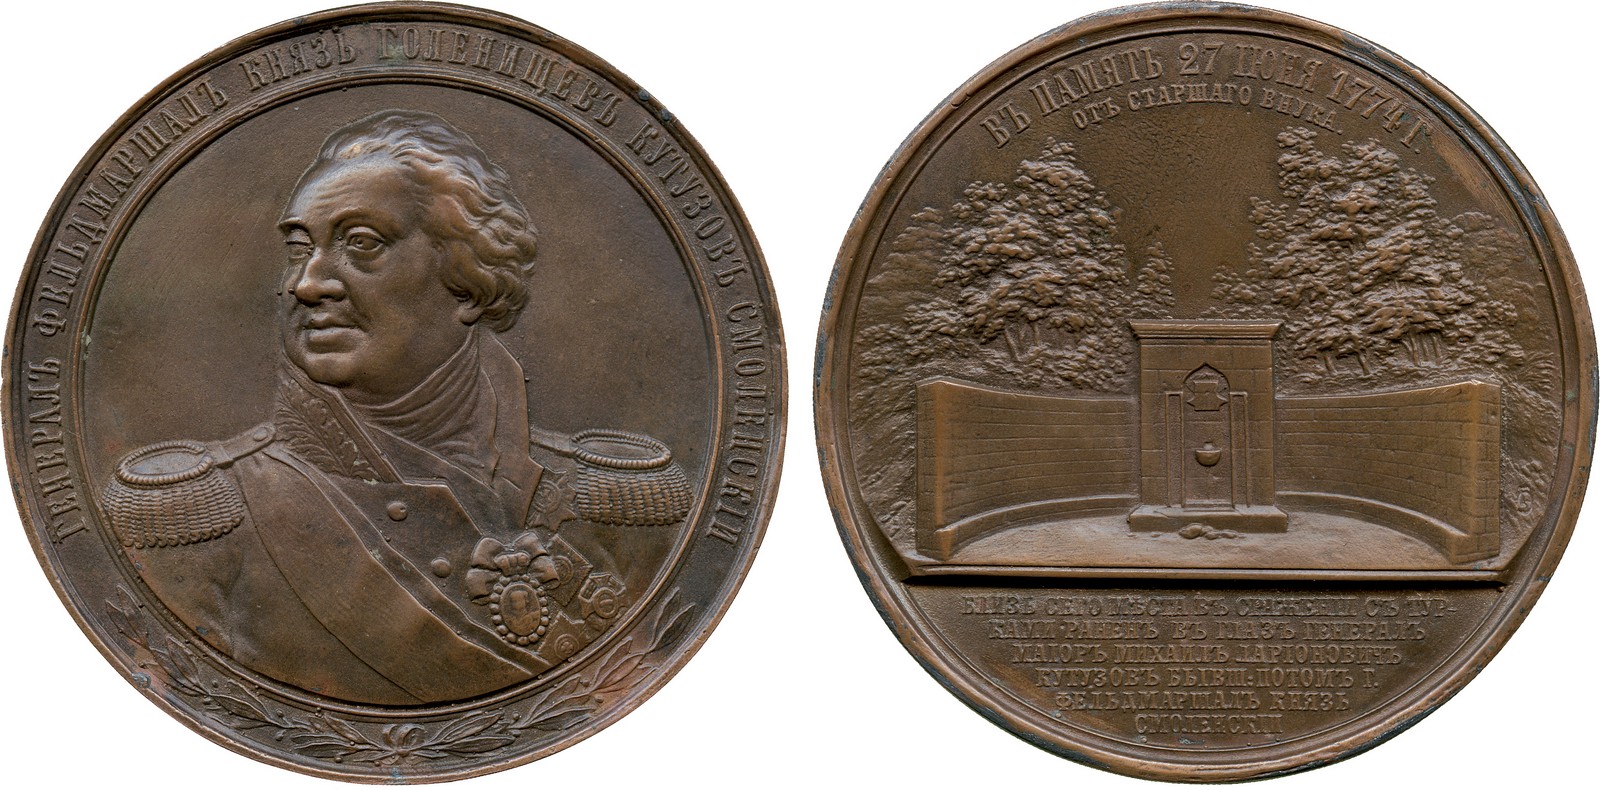 COMMEMORATIVE MEDALS, WORLD MEDALS, Russia, Catherine II (1729-1796), Completion of the Memorial